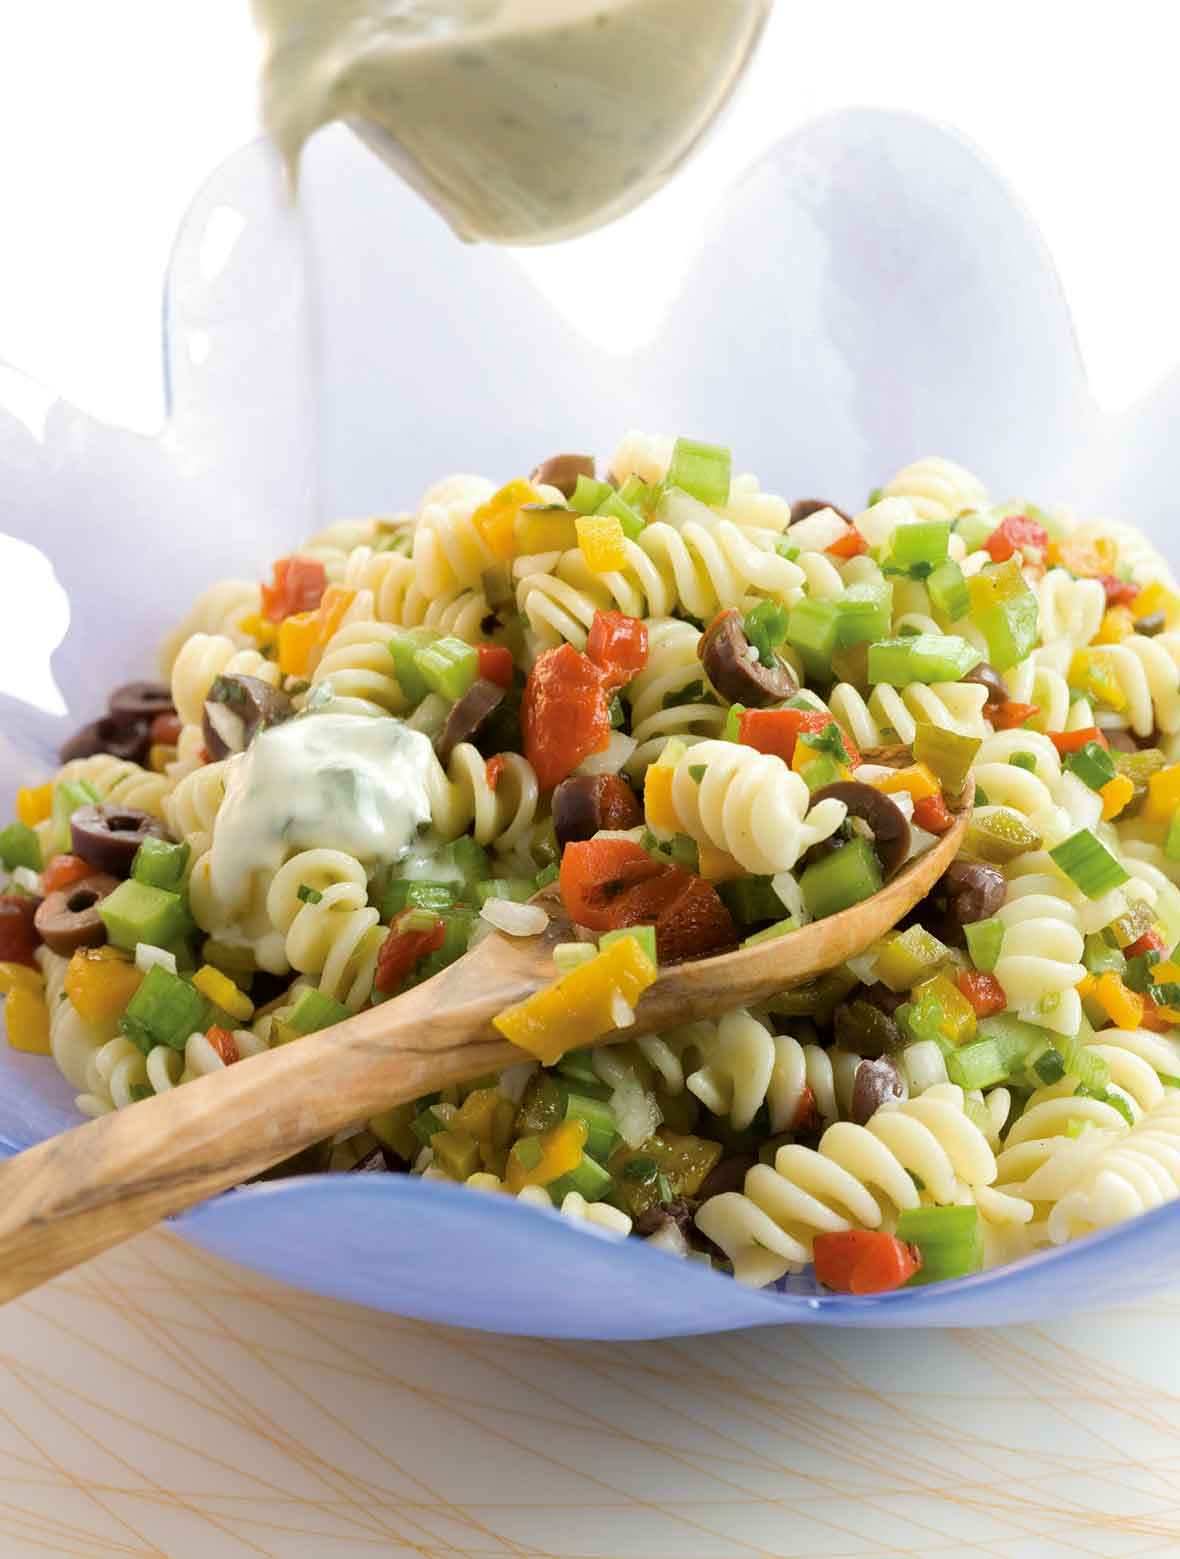 Confetti pasta salad in a large blue bowl with a wooden spoon, being drizzled with yogurt dressing